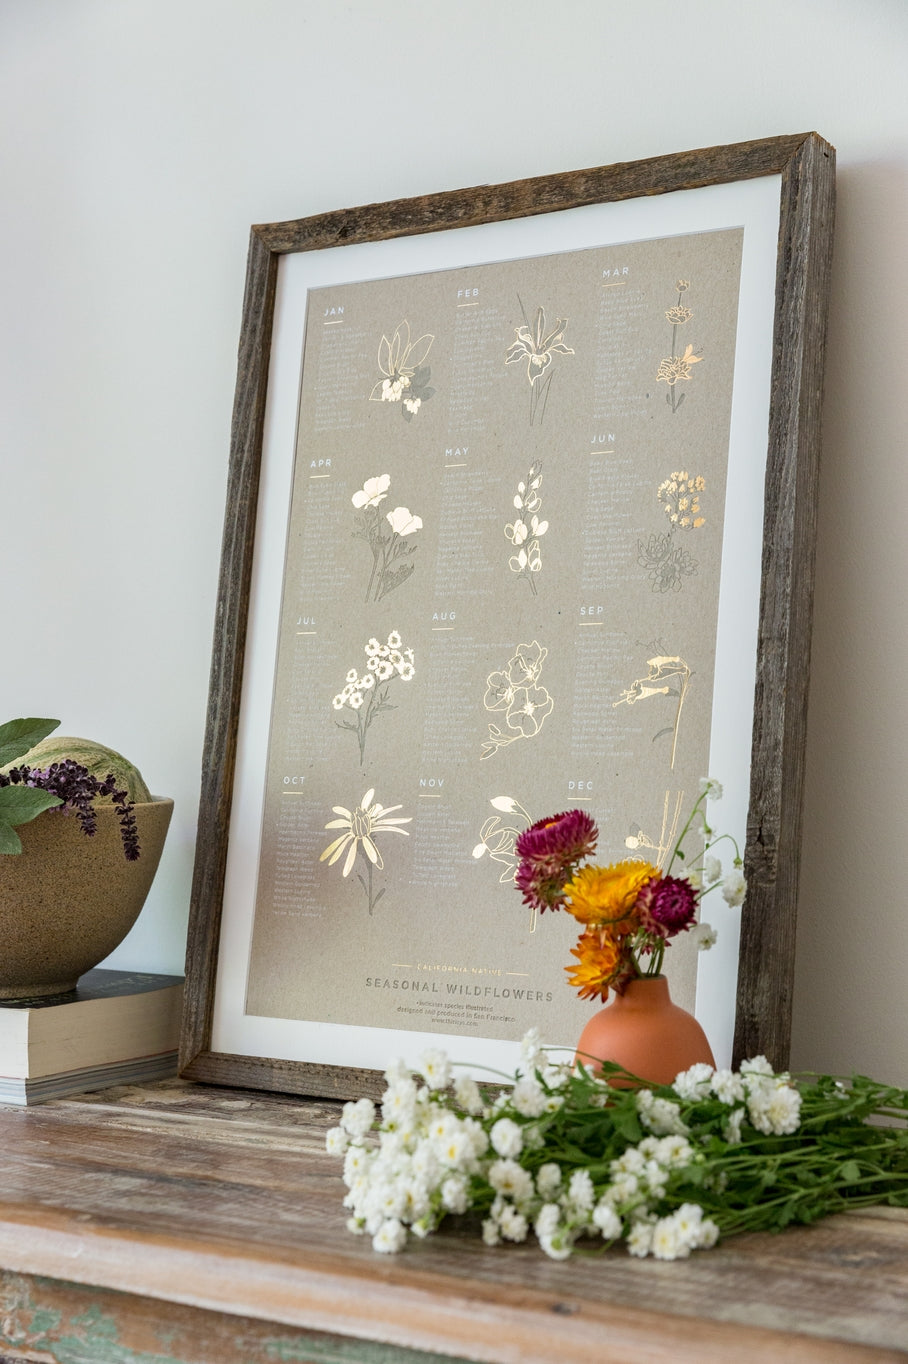 The California Native Wildflower Poster features 150 native species as they bloom each month. The poster features both prolific, common and rare species that are native specifically to the Central Coast and Bay Area. Great reference art that is both elegant and useful for your kitchen, dining room or kids room!